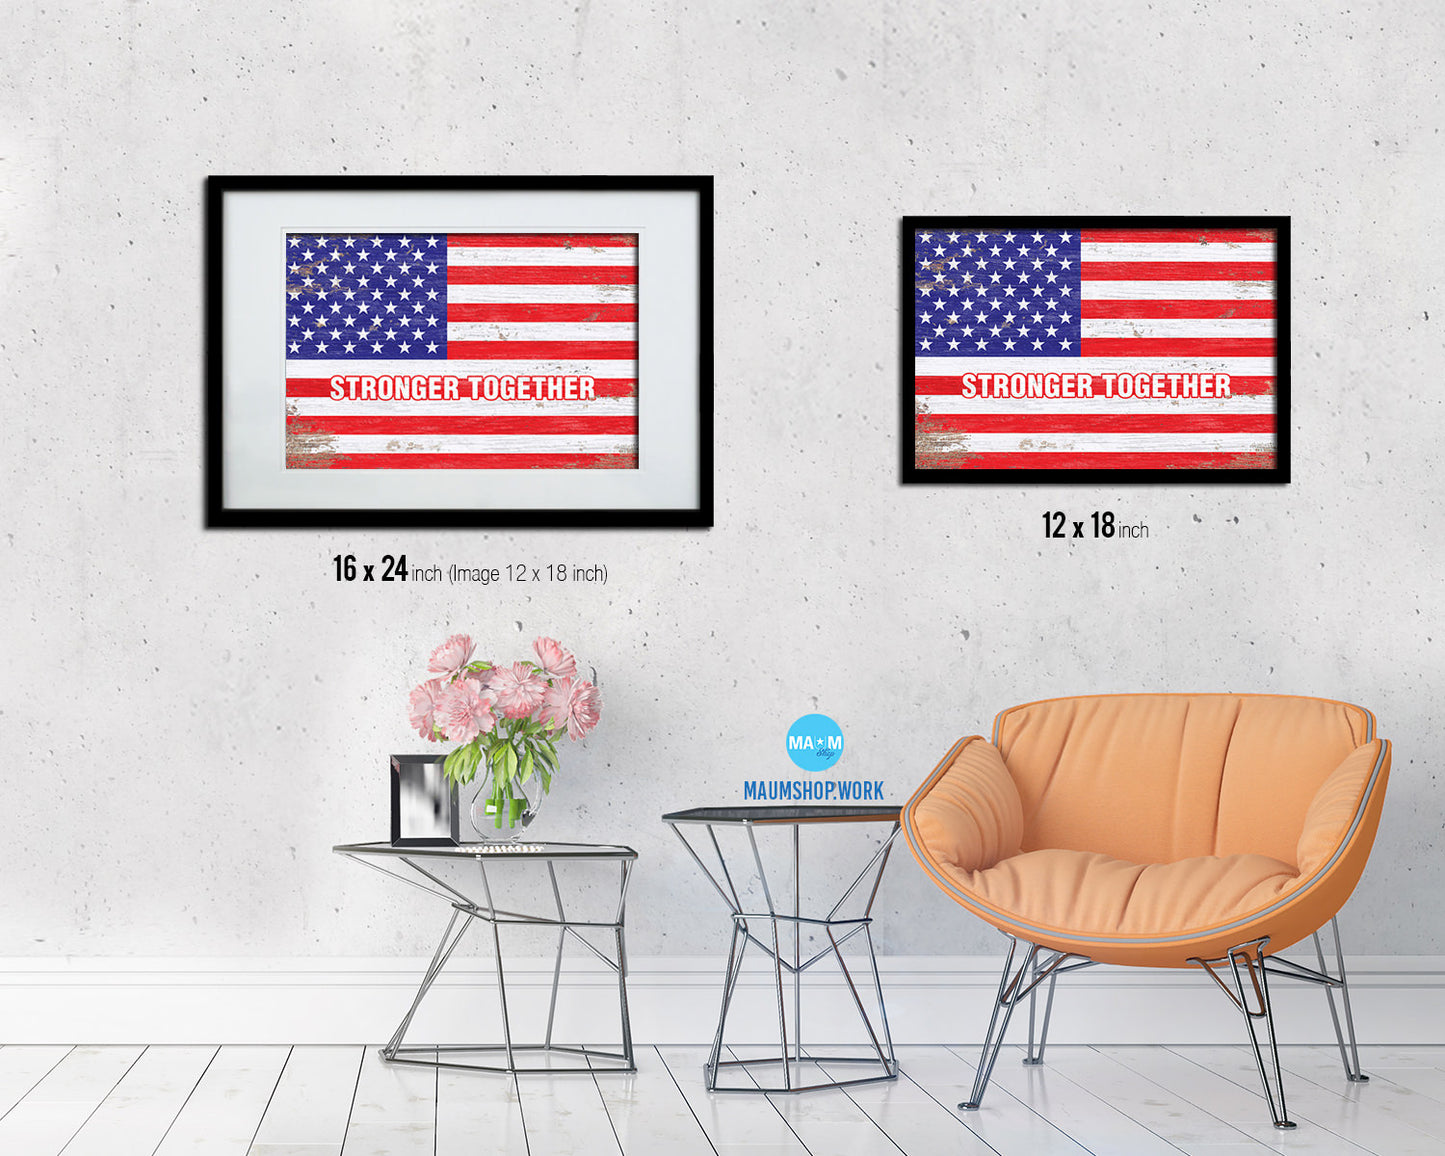 Stronger Together, Hillary Clinton Campaign Shabby Chic Military Flag Framed Print Art